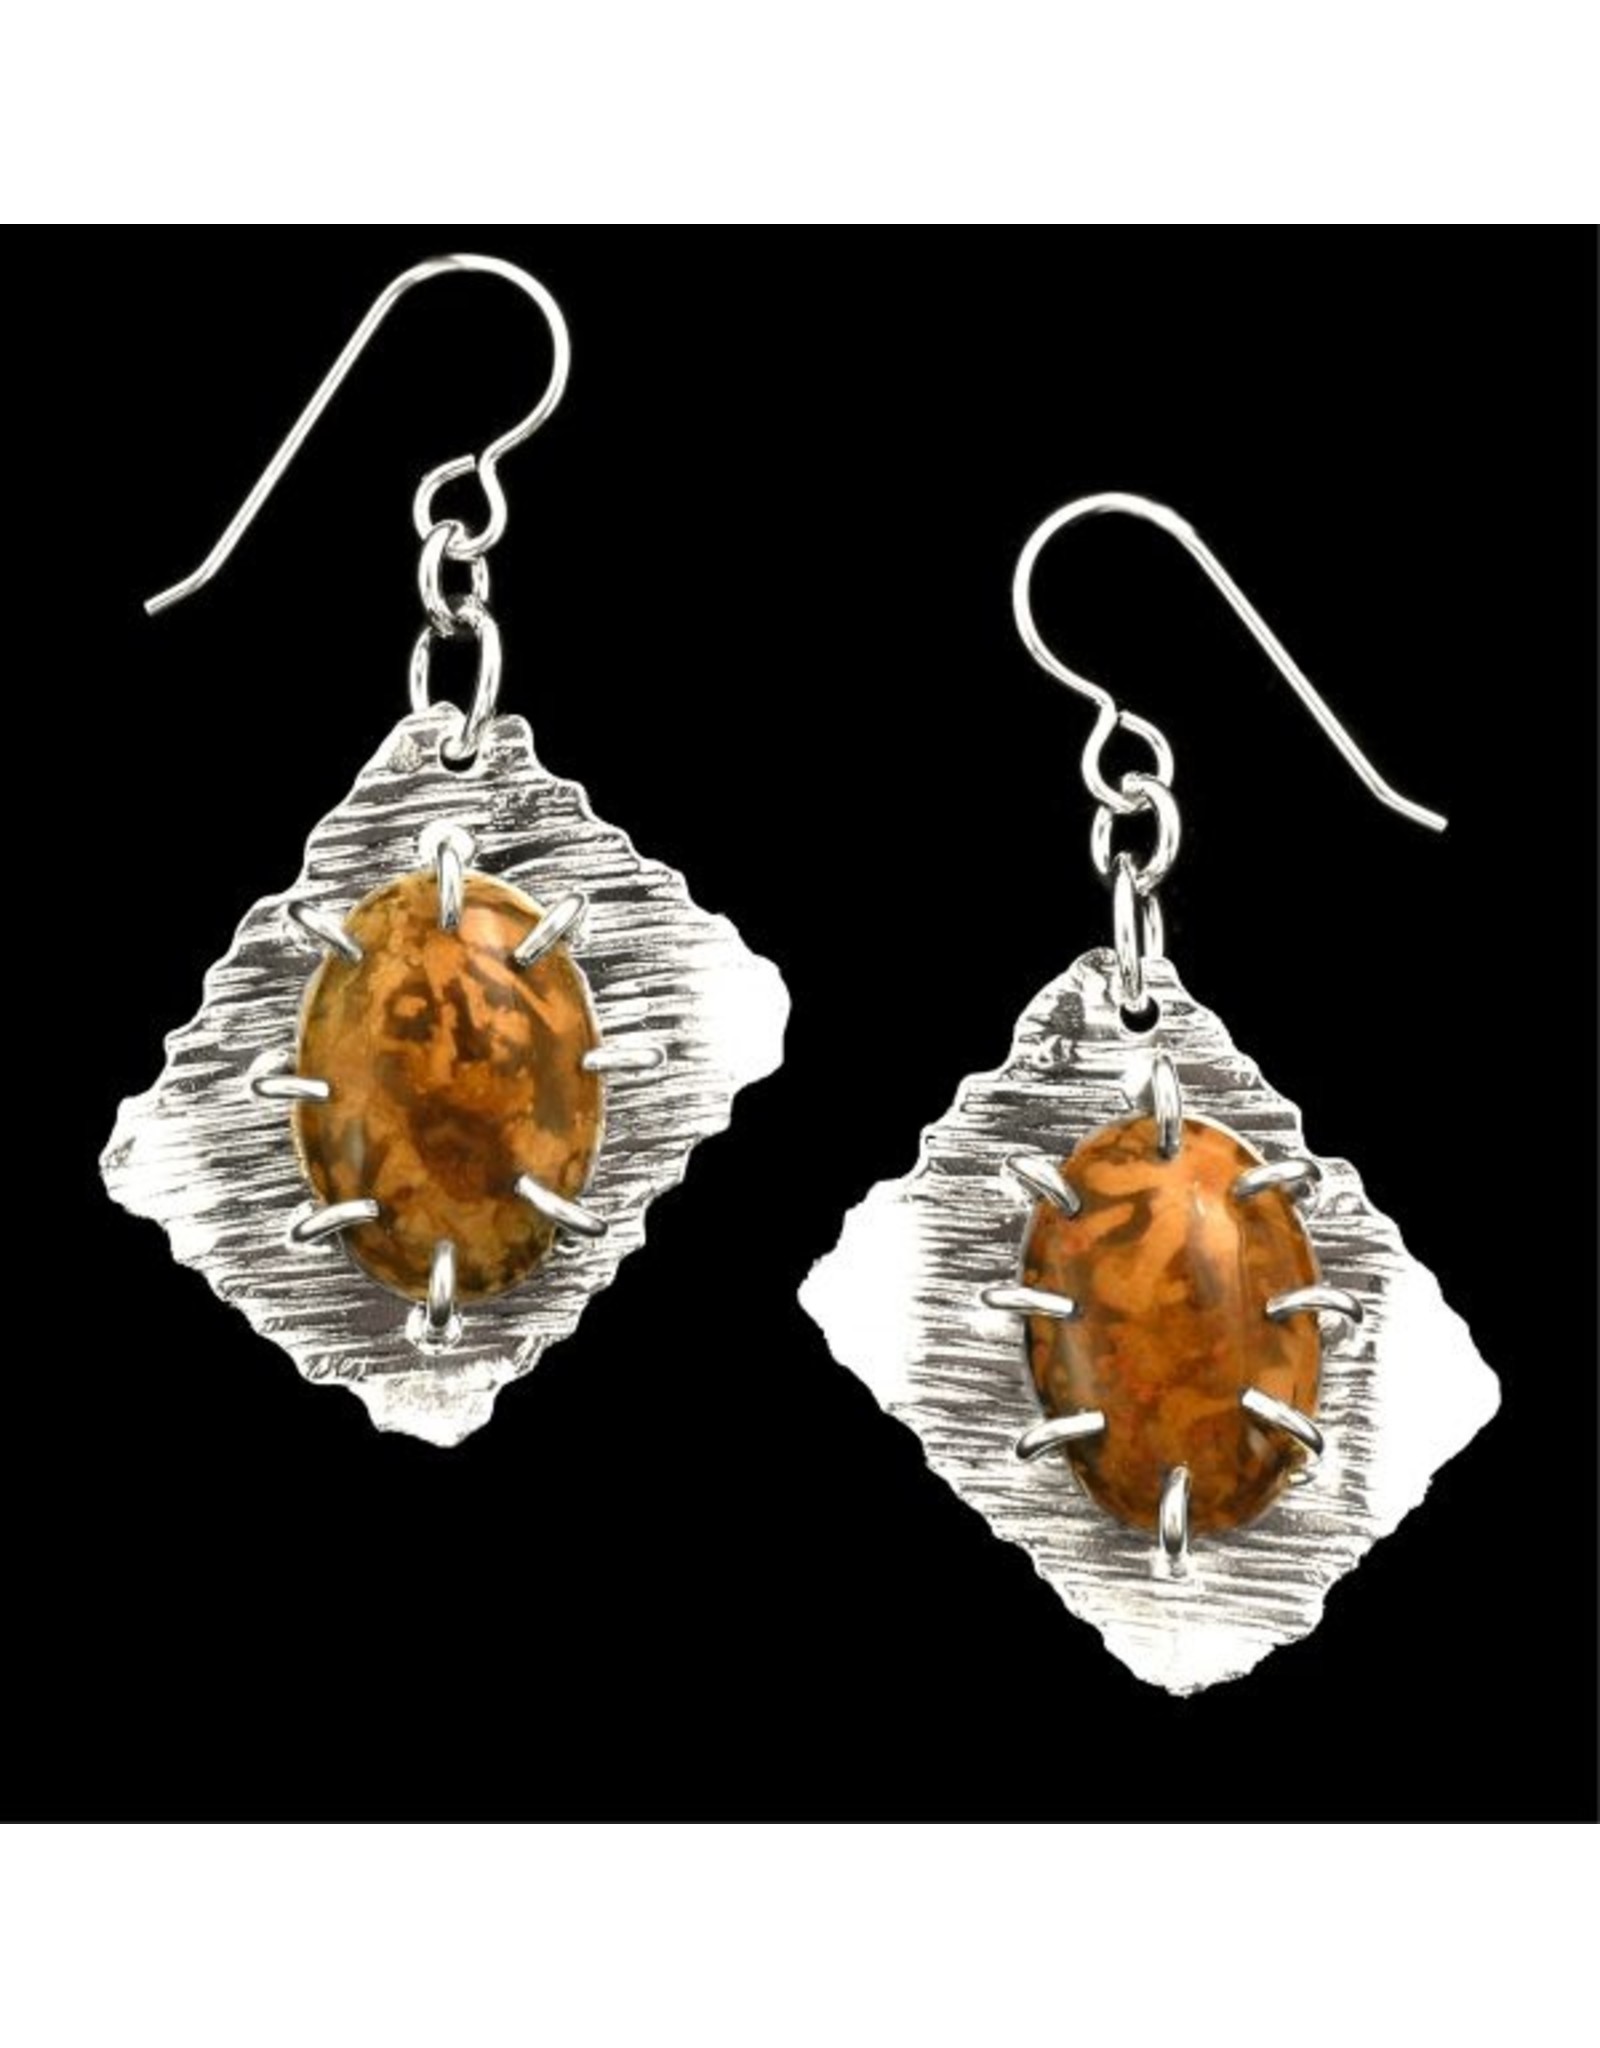 Peter Bauer  "Flower Stone", earrings, hand-forged sterling silver with chrysanthemum stone, by Peter Bauer